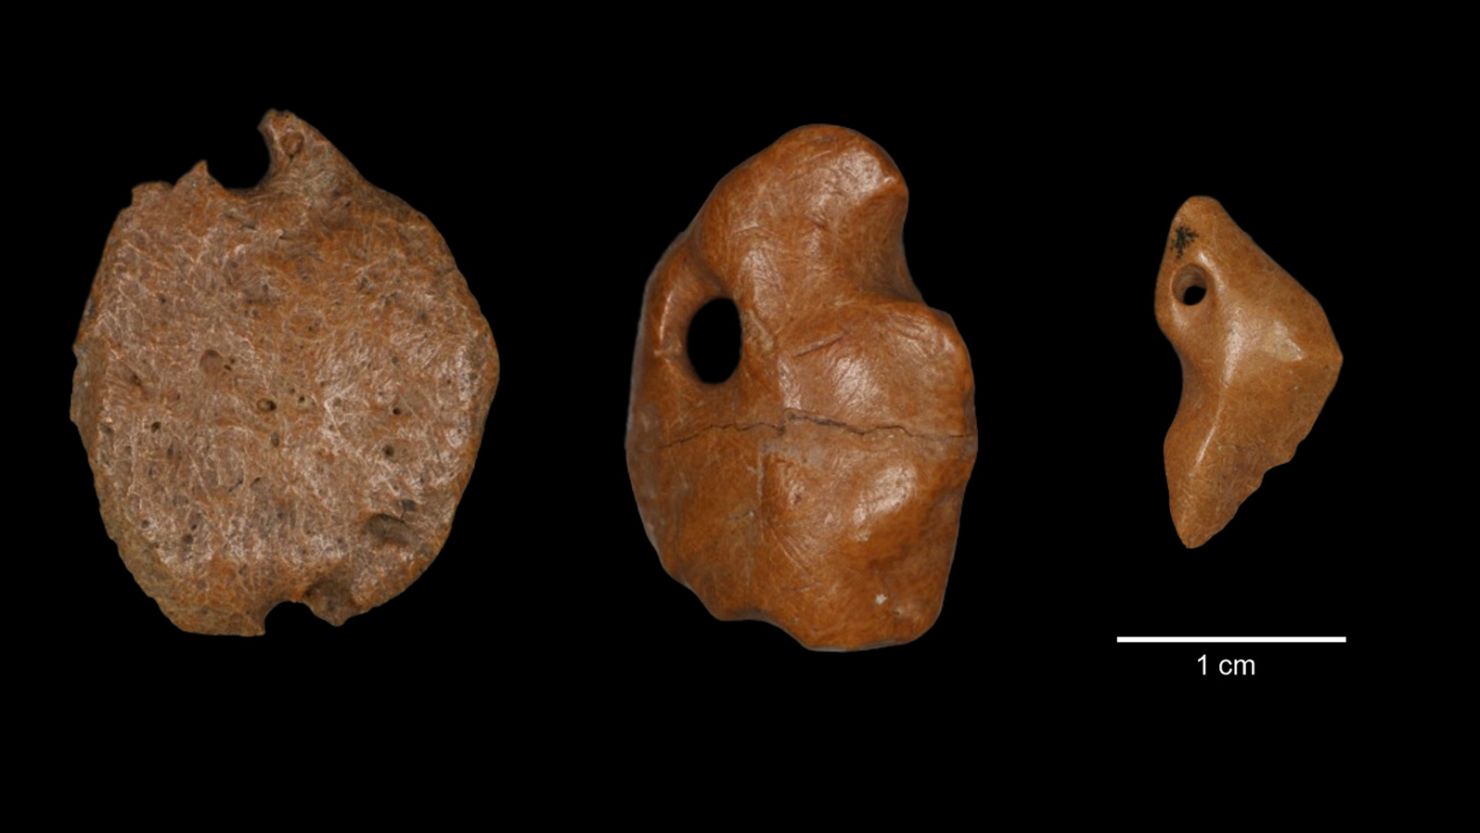 This image provided by researchers shows artifacts made of bony material from a giant sloth discovered at a rock shelter in Brazil, recovered from archaeological layers dated to 25,000 to 27,000 years ago. Research published Wednesday, July 12, 2023, in Britain's Proceedings of the Royal Society B journal, suggests humans lived in South America at the same time as now-extinct giant sloths, bolstering evidence that people arrived in the Americas earlier than once thought. (Thais Rabito Pansani via AP)